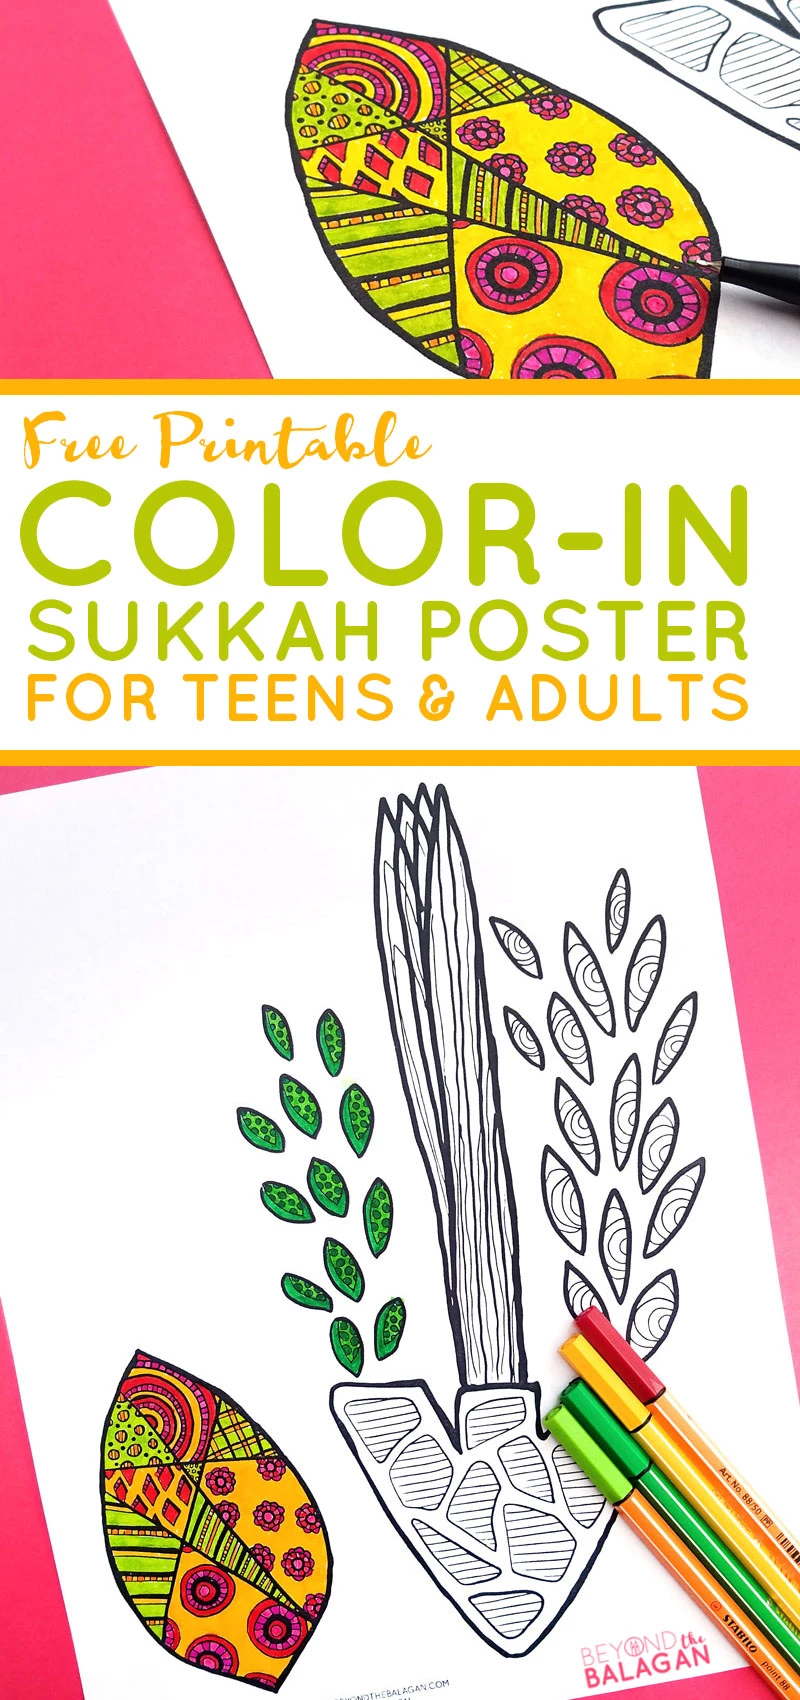 Print and color this free printable sukkah poster coloring page for adults! This cool sukkah decoration craft can be colored on many levels - by adults, teens, or big kids. Print in poster size at your local printer, or print on regular paper and frame! This unique Jewish coloring page for the holiday of sukkos is so pretty and modern! #jewishcrafts #sukkos #sukkot #coloringpage